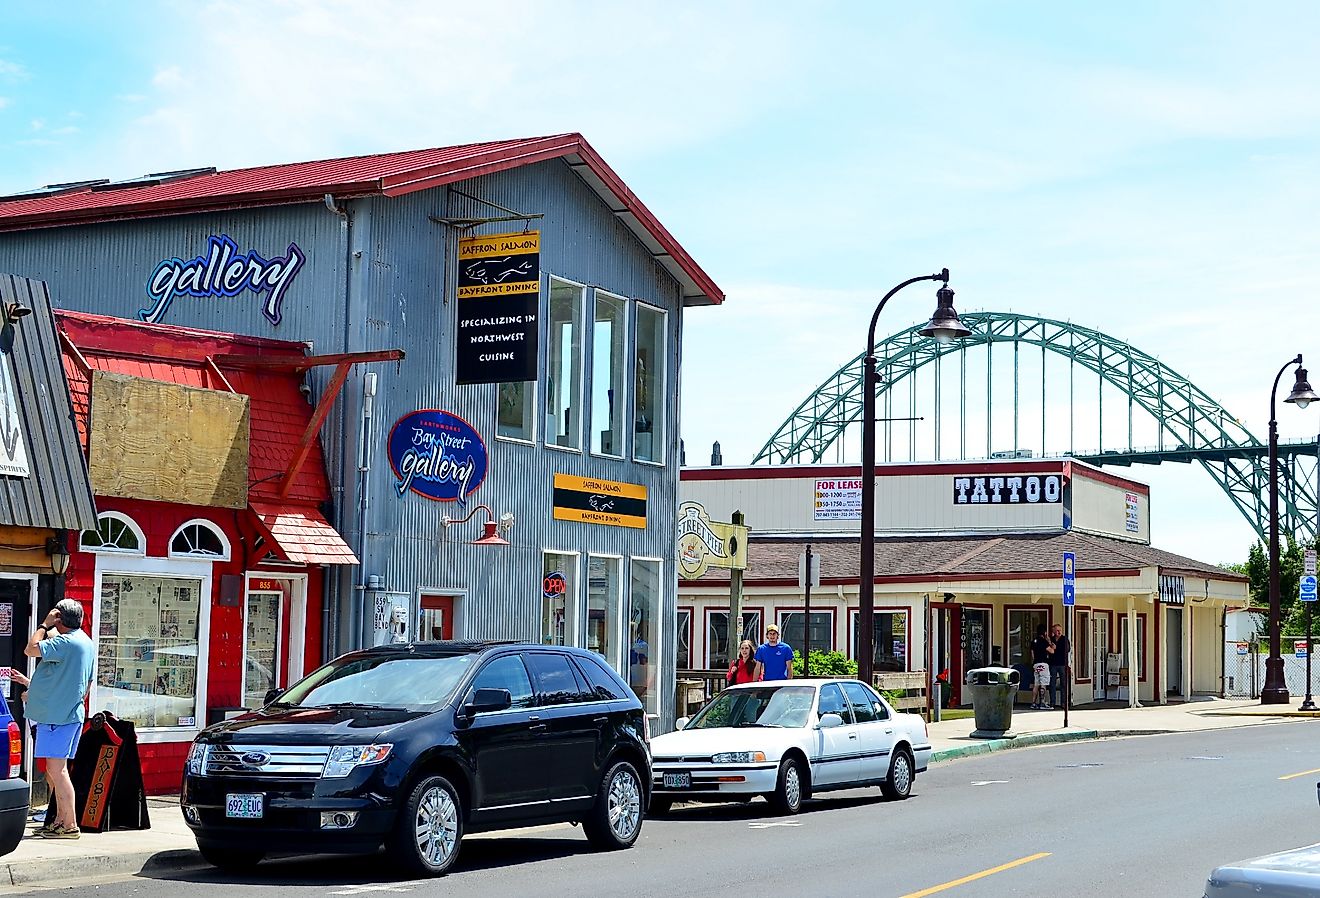 Front street view of Newport, Oregon with Yaquina Bay bridge in the background. Image credit Yieksu via Shutterstock